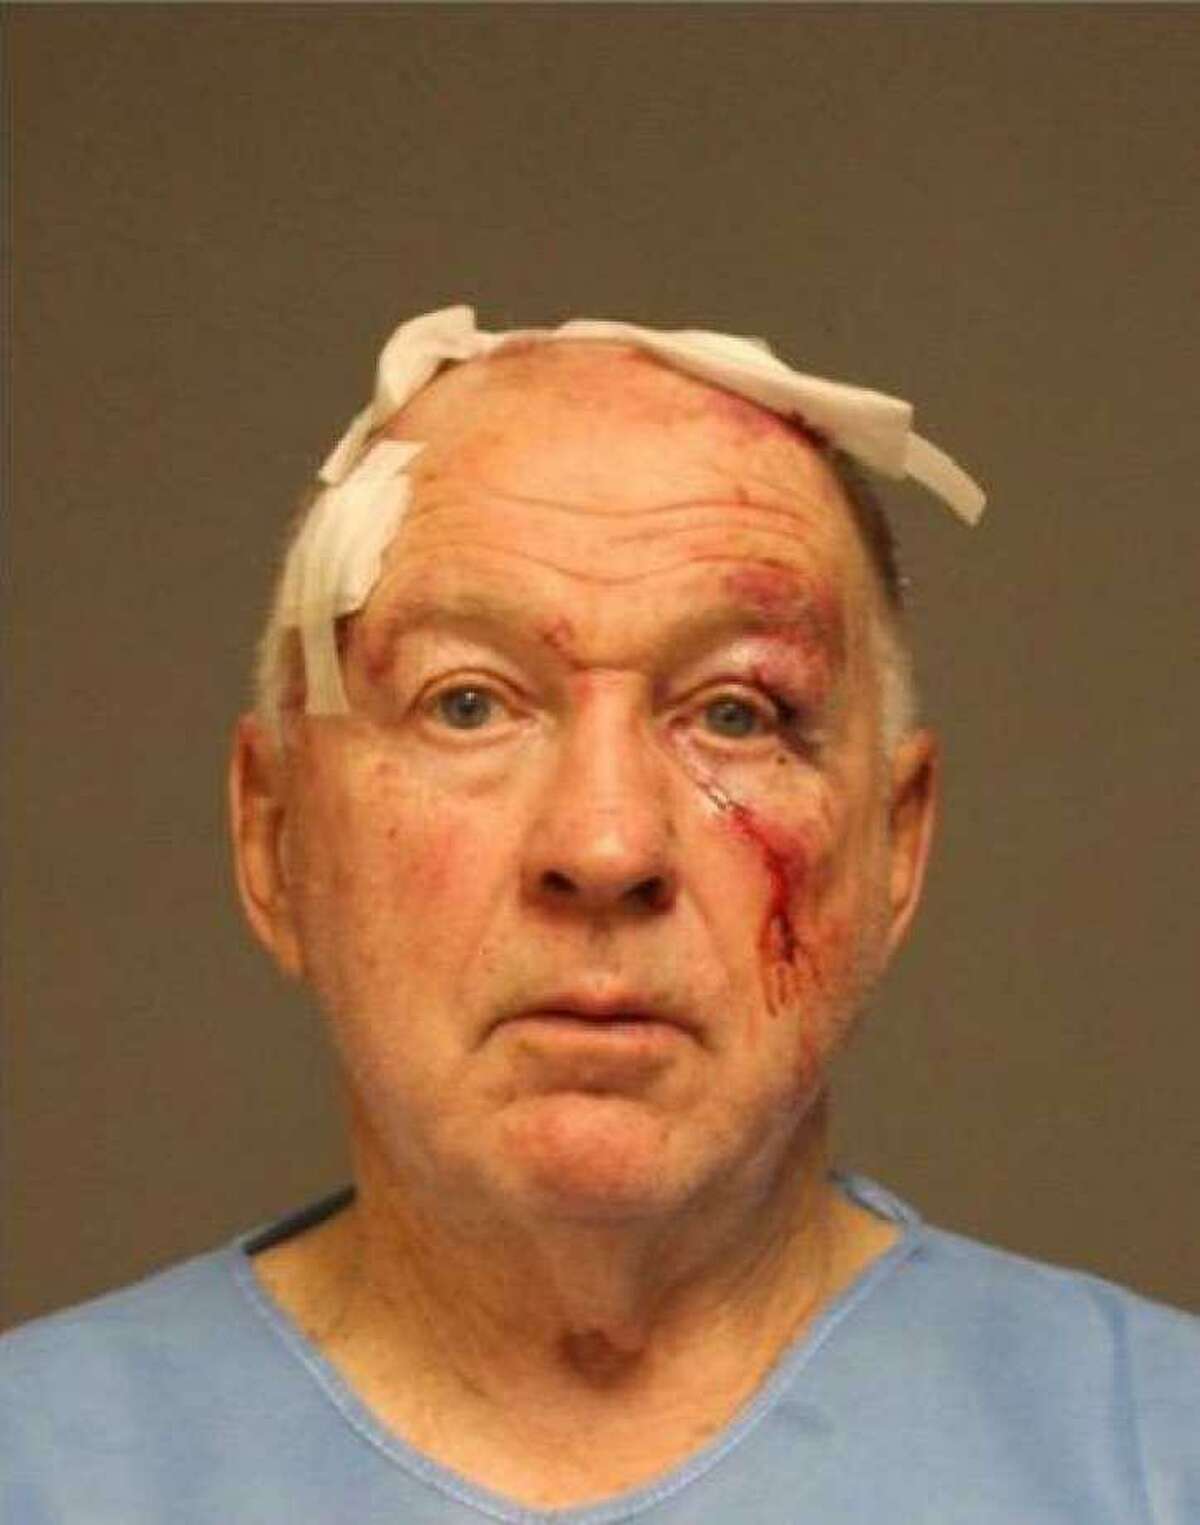 FEB. 3, 2019 9:30 P.M. — James Taylor allegedly shoots ex-wife Catherine Taylor Police said Catherine Taylor's son, Donald Garamella, ran into his living room and found James Taylor, 75, holding a .22 caliber rifle and standing over 70-year-old Catherine Taylor, who was bleeding from the head and motionless. Police said Taylor then tried loading another round into the rifle and leveling it at Garamella. But Garamella tackled him and struck Taylor several times in self-defense while calling 911, police said.